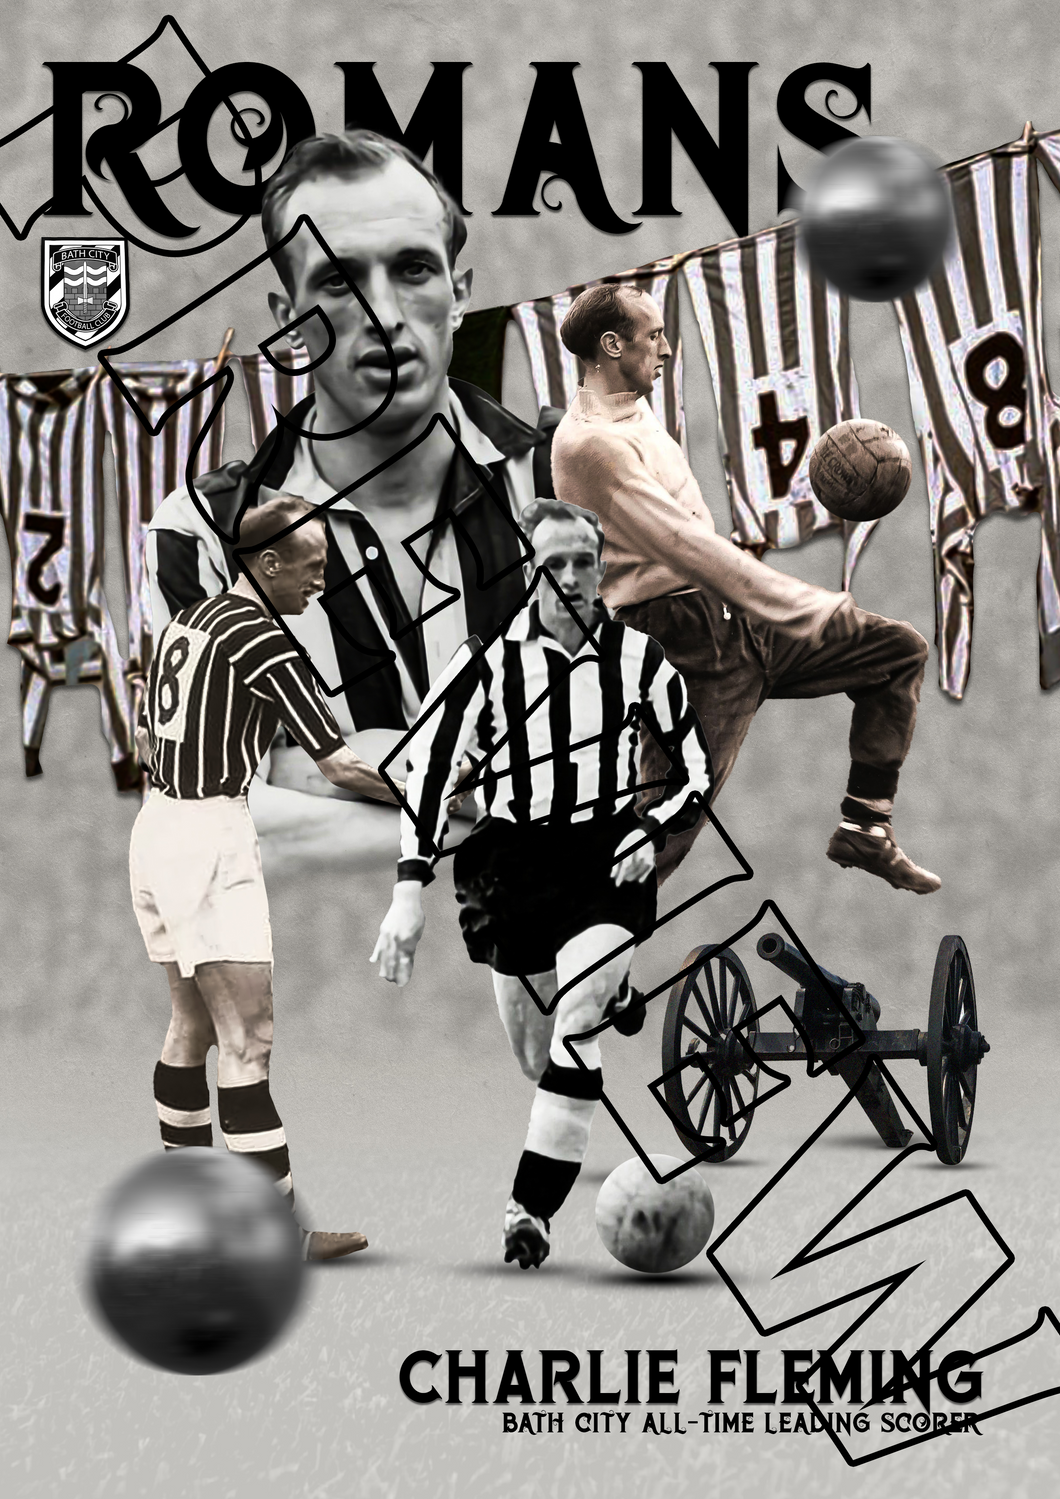 Limited Edition Player Print - Club Legend Charlie Fleming